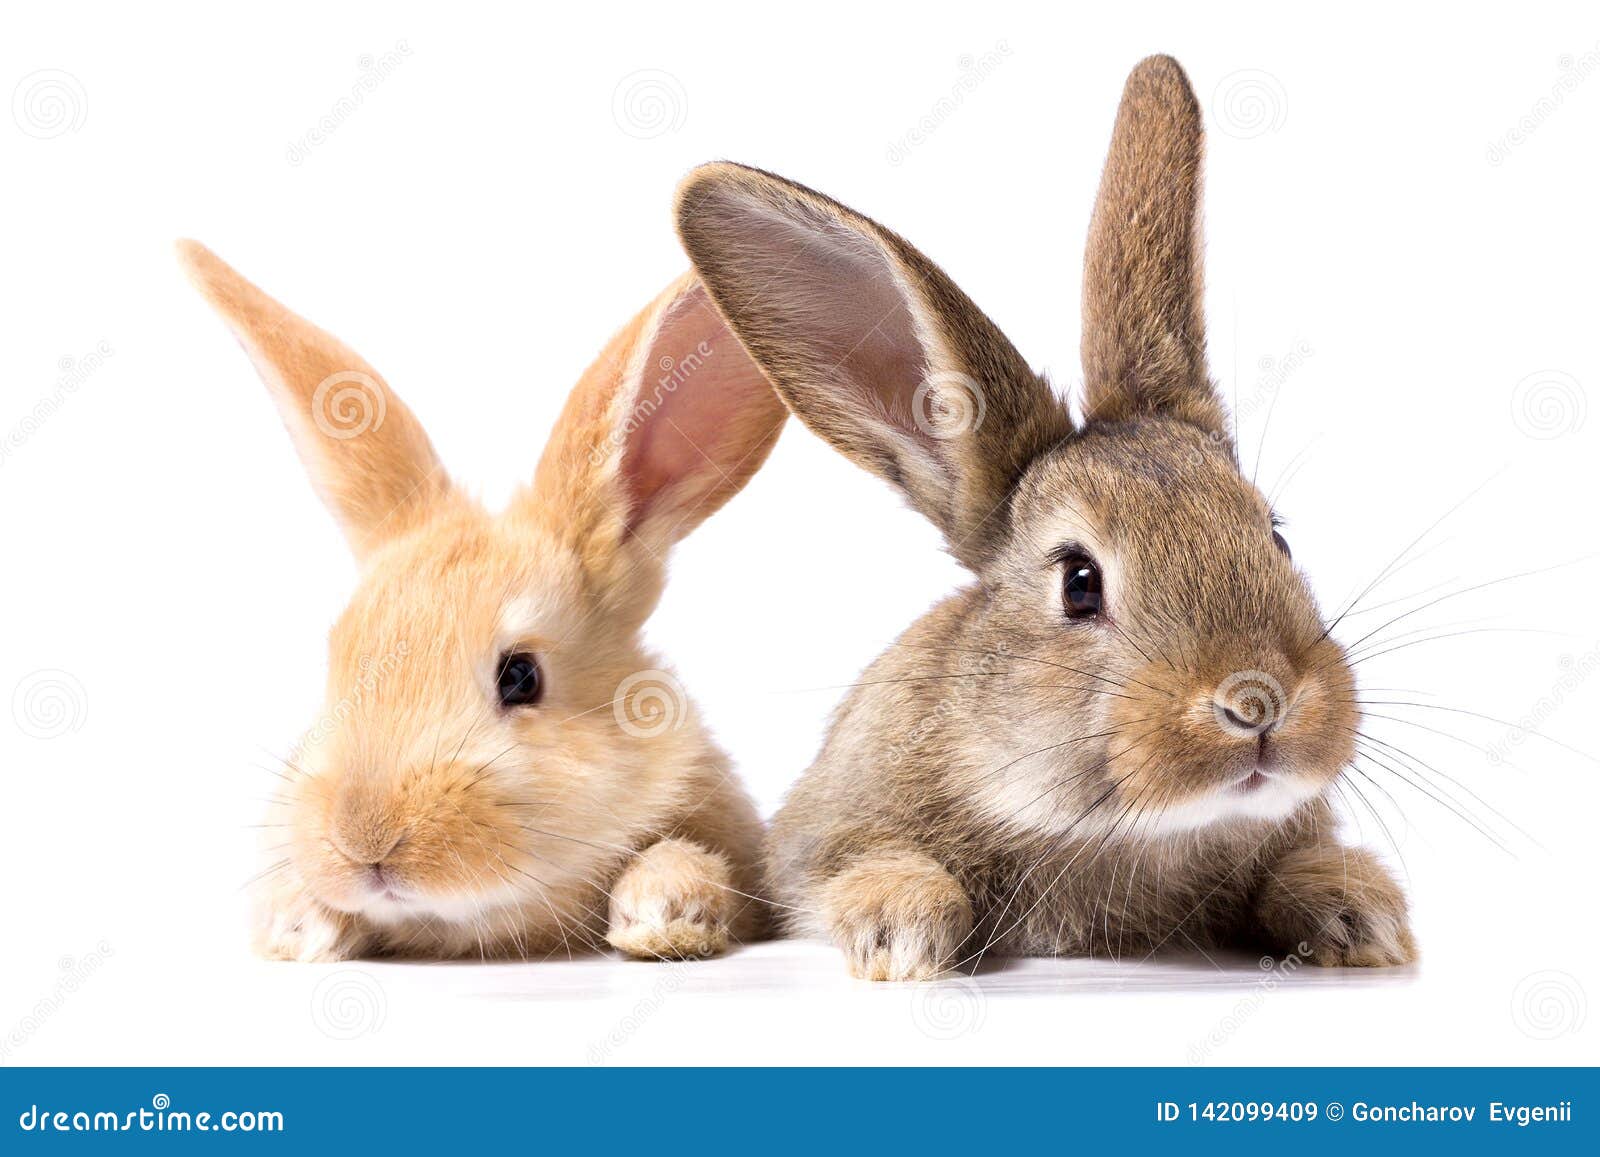 two fluffy bunnies look at the signboard.  on white background easter bunny. red and gray rabbit peeking.